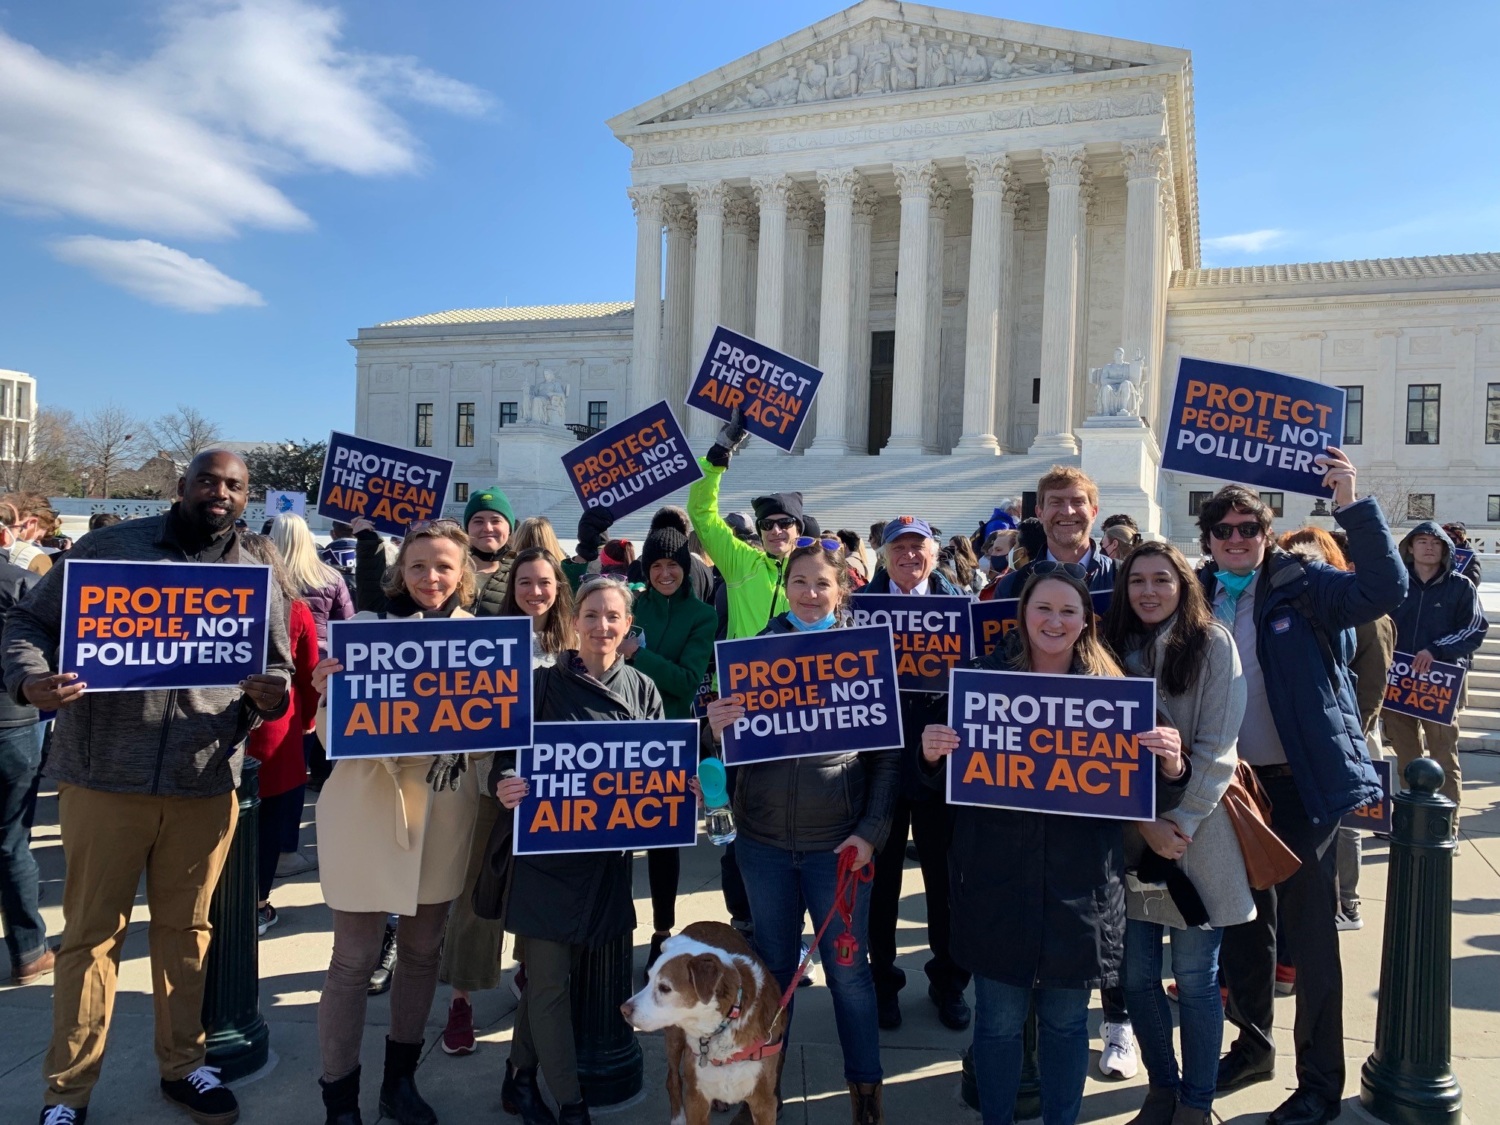 Staff holding signs that read "Protect People Not Polluters" and "Protect The Clean Air Act" while standing outside the Supreme Court building